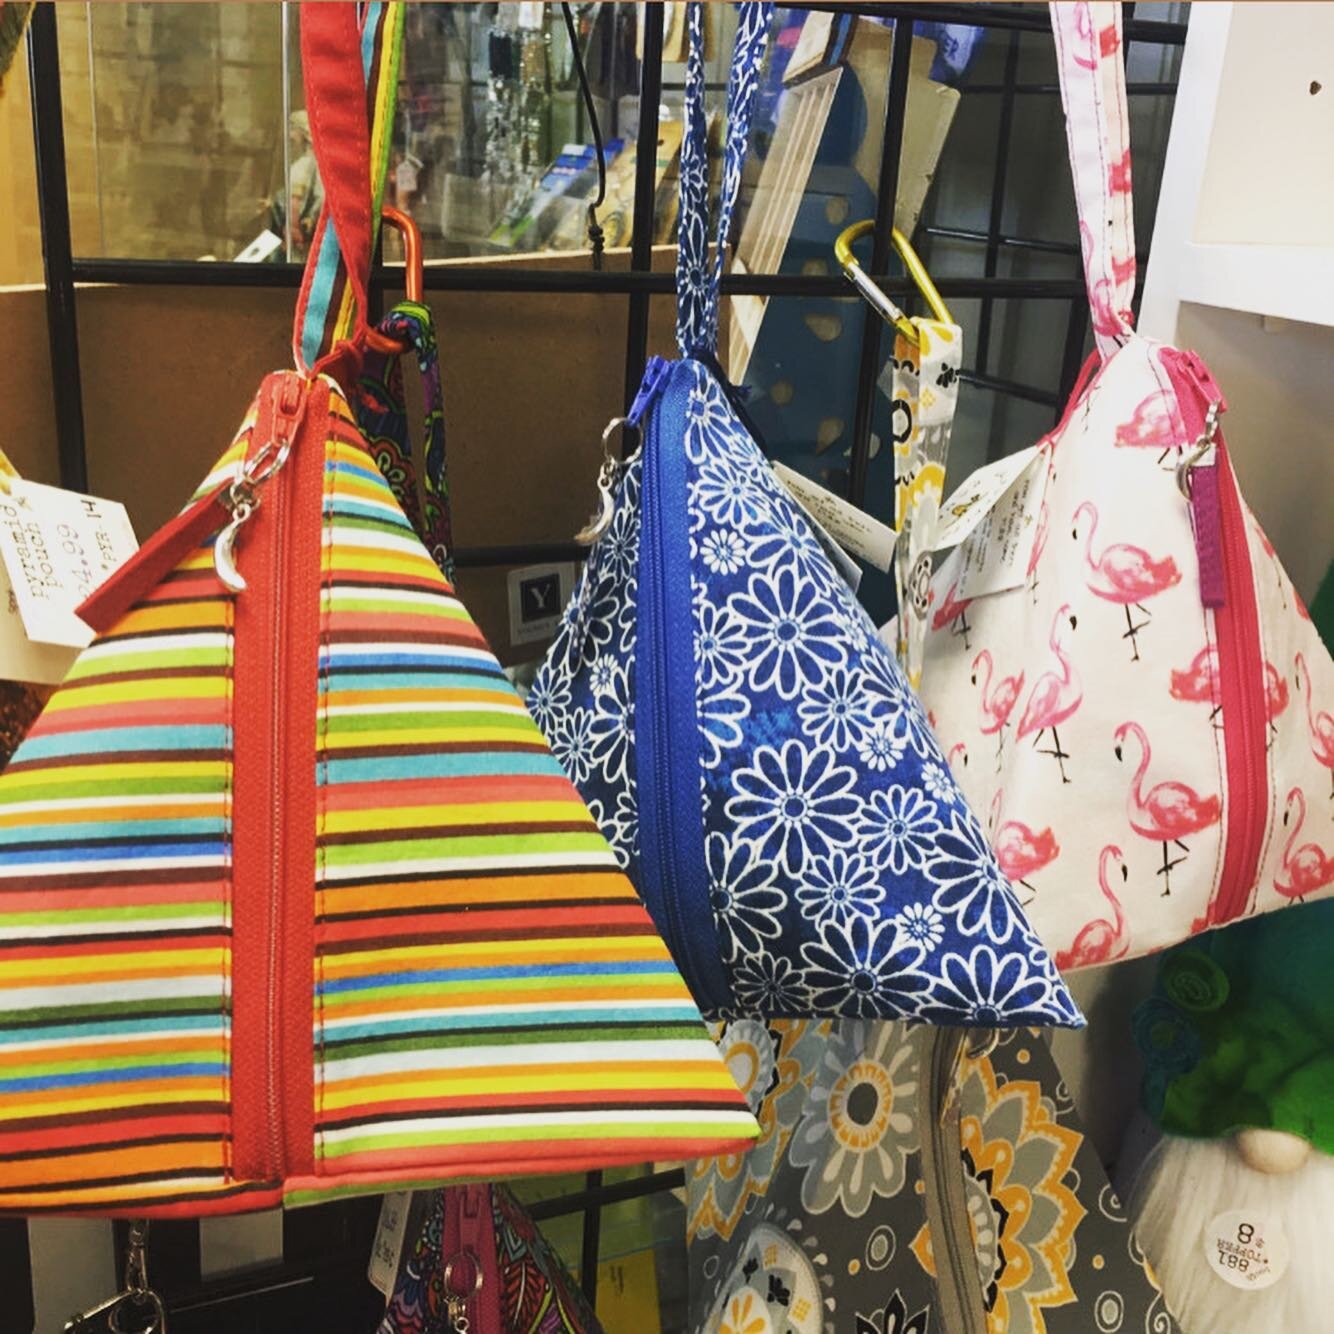 New PYRAMID POUCHES!! Perfect little wristlets by #halfpeeledbanana !🍌🍌Available now at @curatemercantile Stop by this weekend during their #shoplocal Spring Event (or any day) to grab your own!! 
🍌
Contact me if you have a specific design you wan